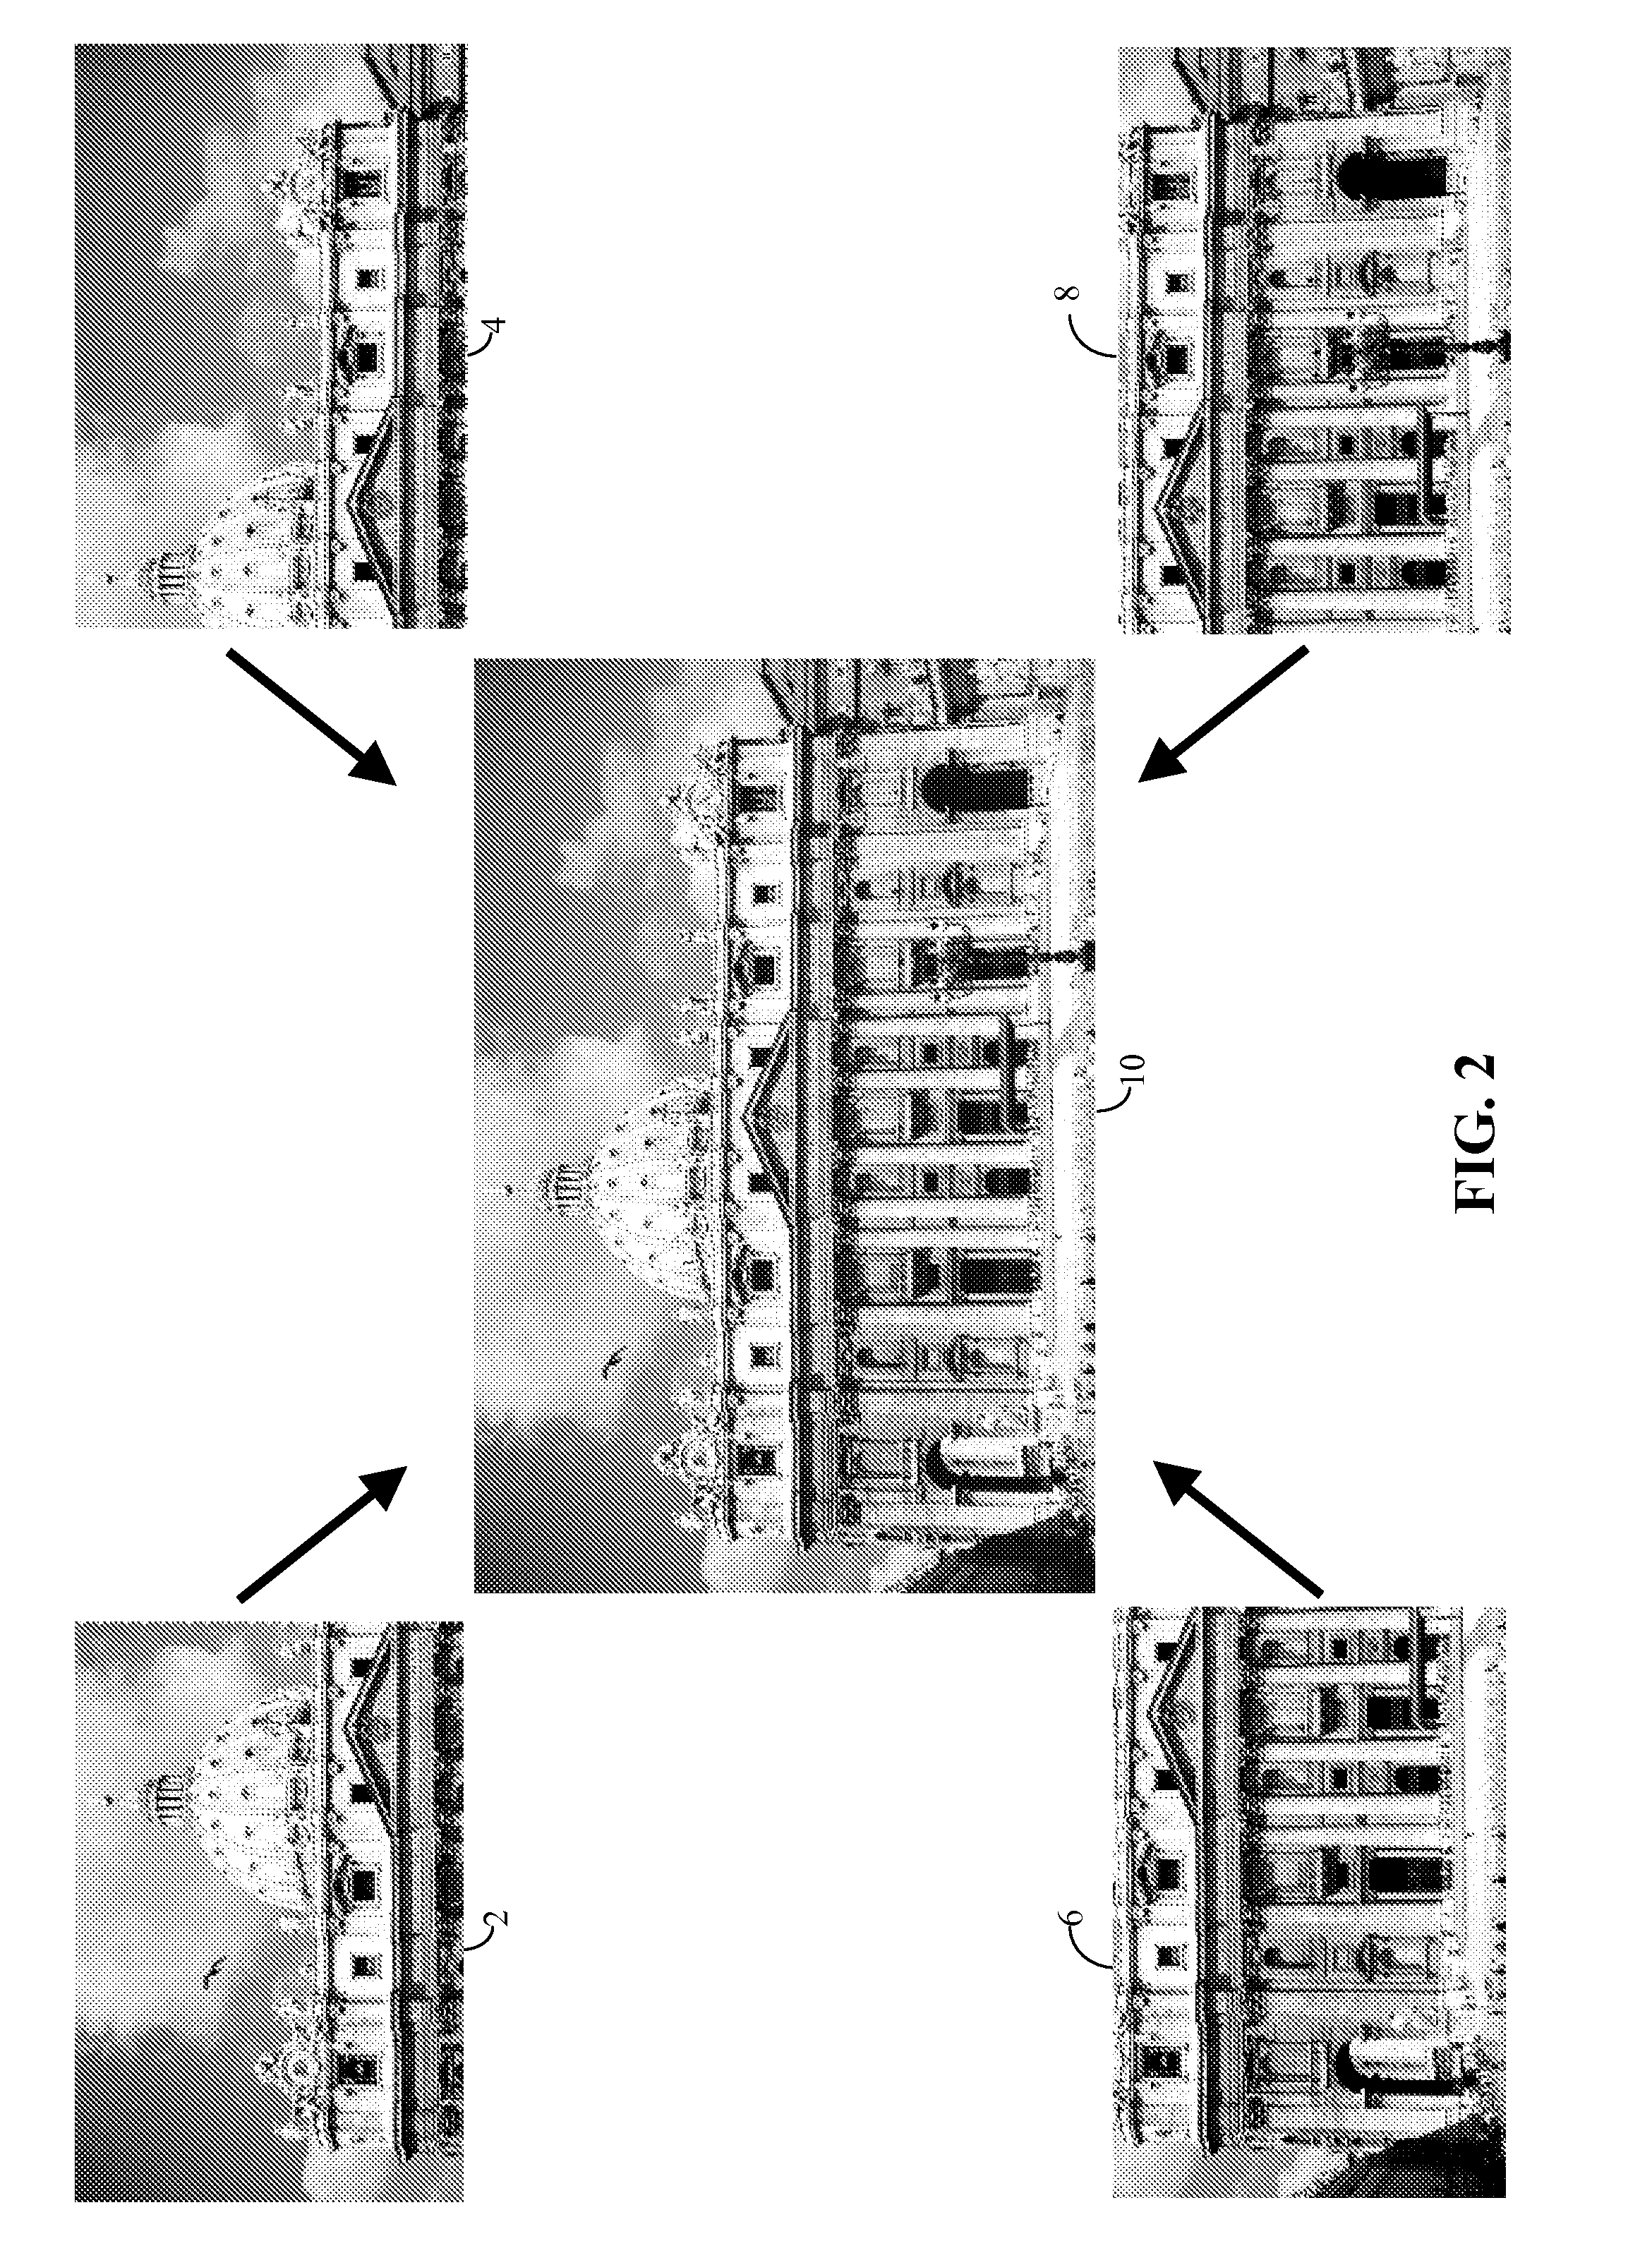 Context and epsilon stereo constrained correspondence matching